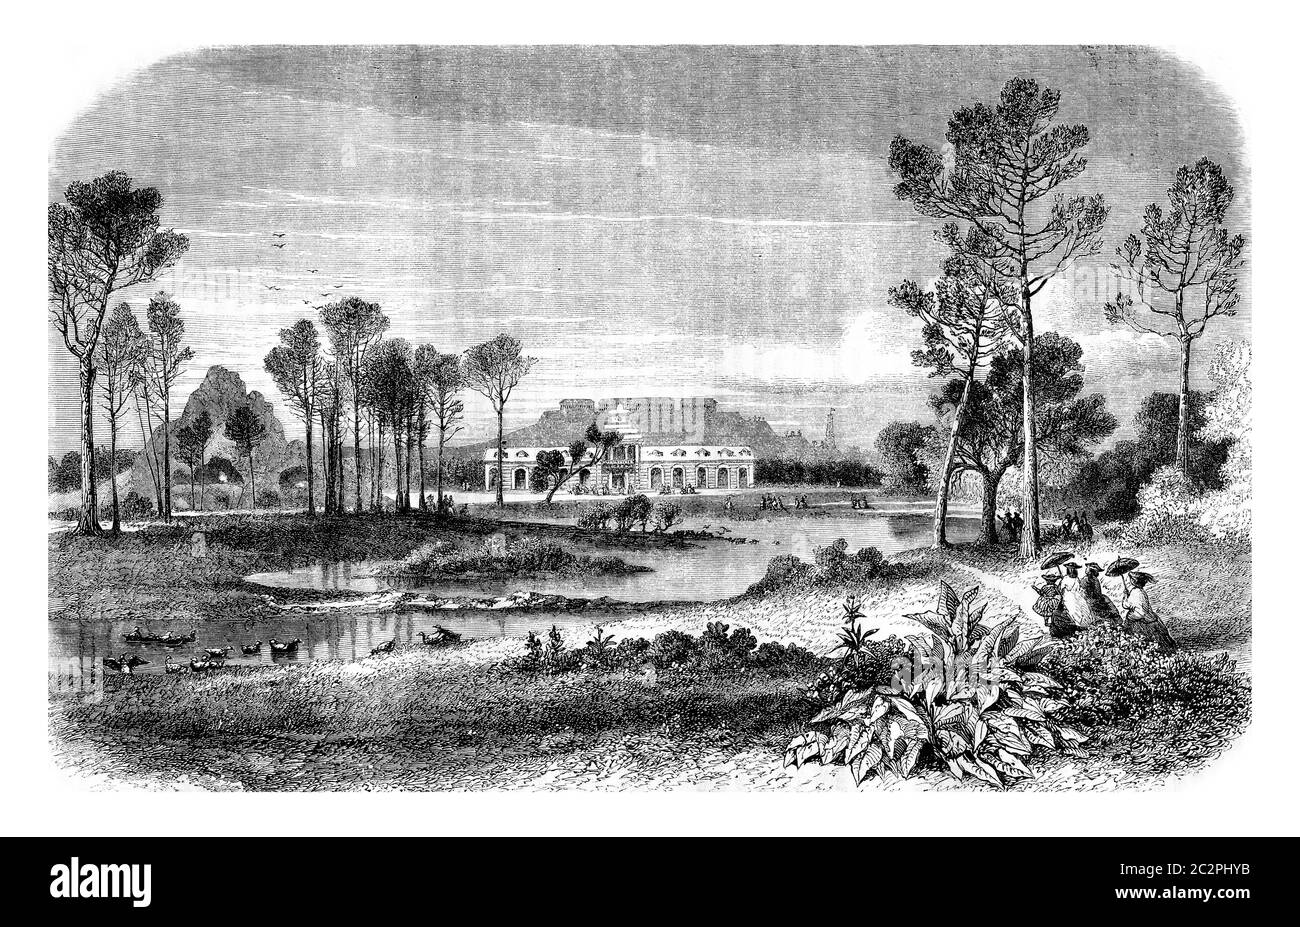 View of Zoological Gardens in the Bois de Boulogne, Paris, vintage engraved illustration. Magasin Pittoresque 1861. Stock Photo